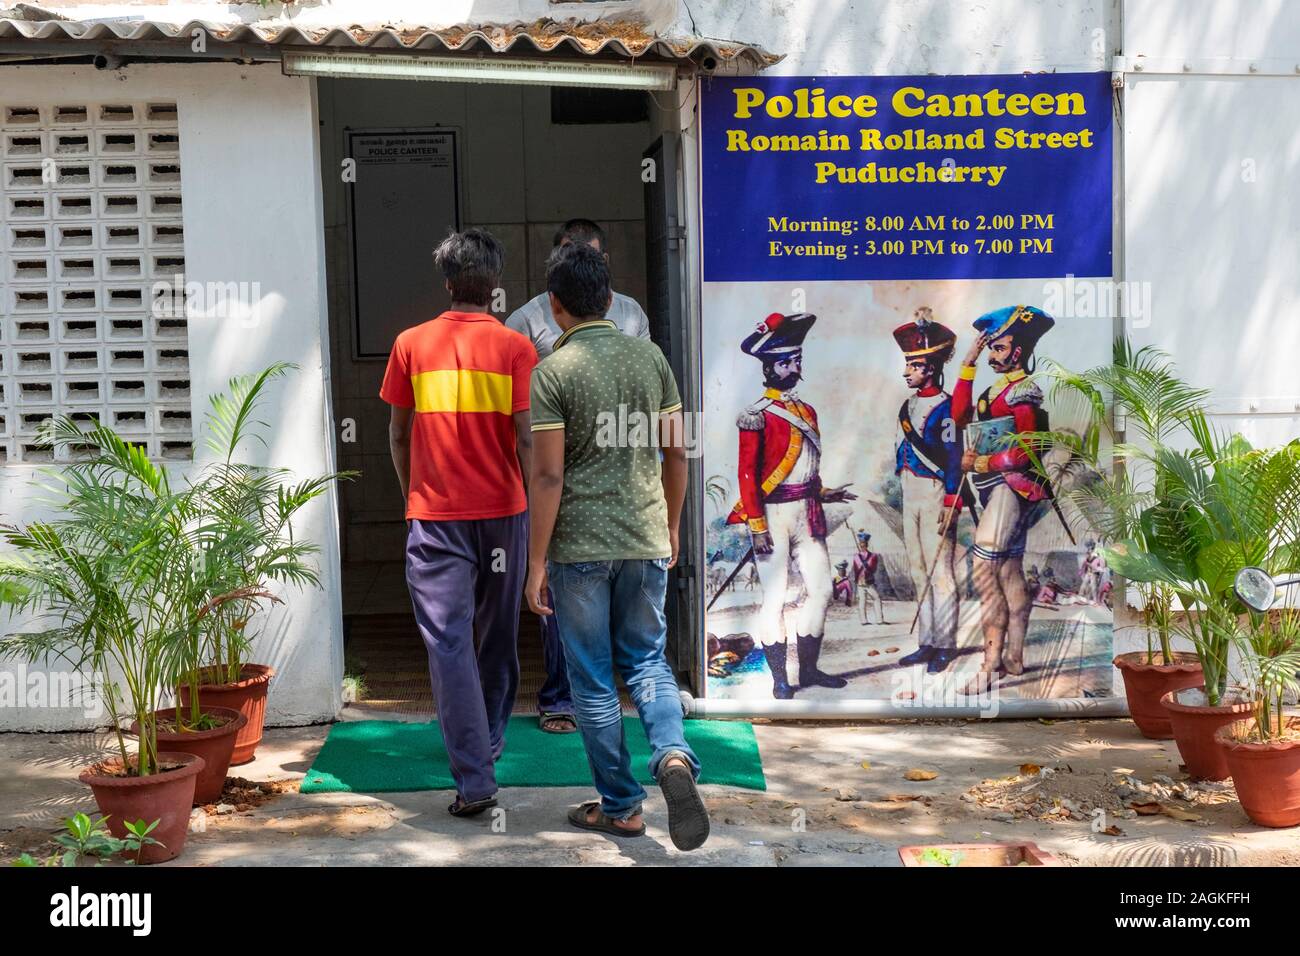 Men entering in the police canteen, Puducherry, Tamil Nadu, India Stock Photo